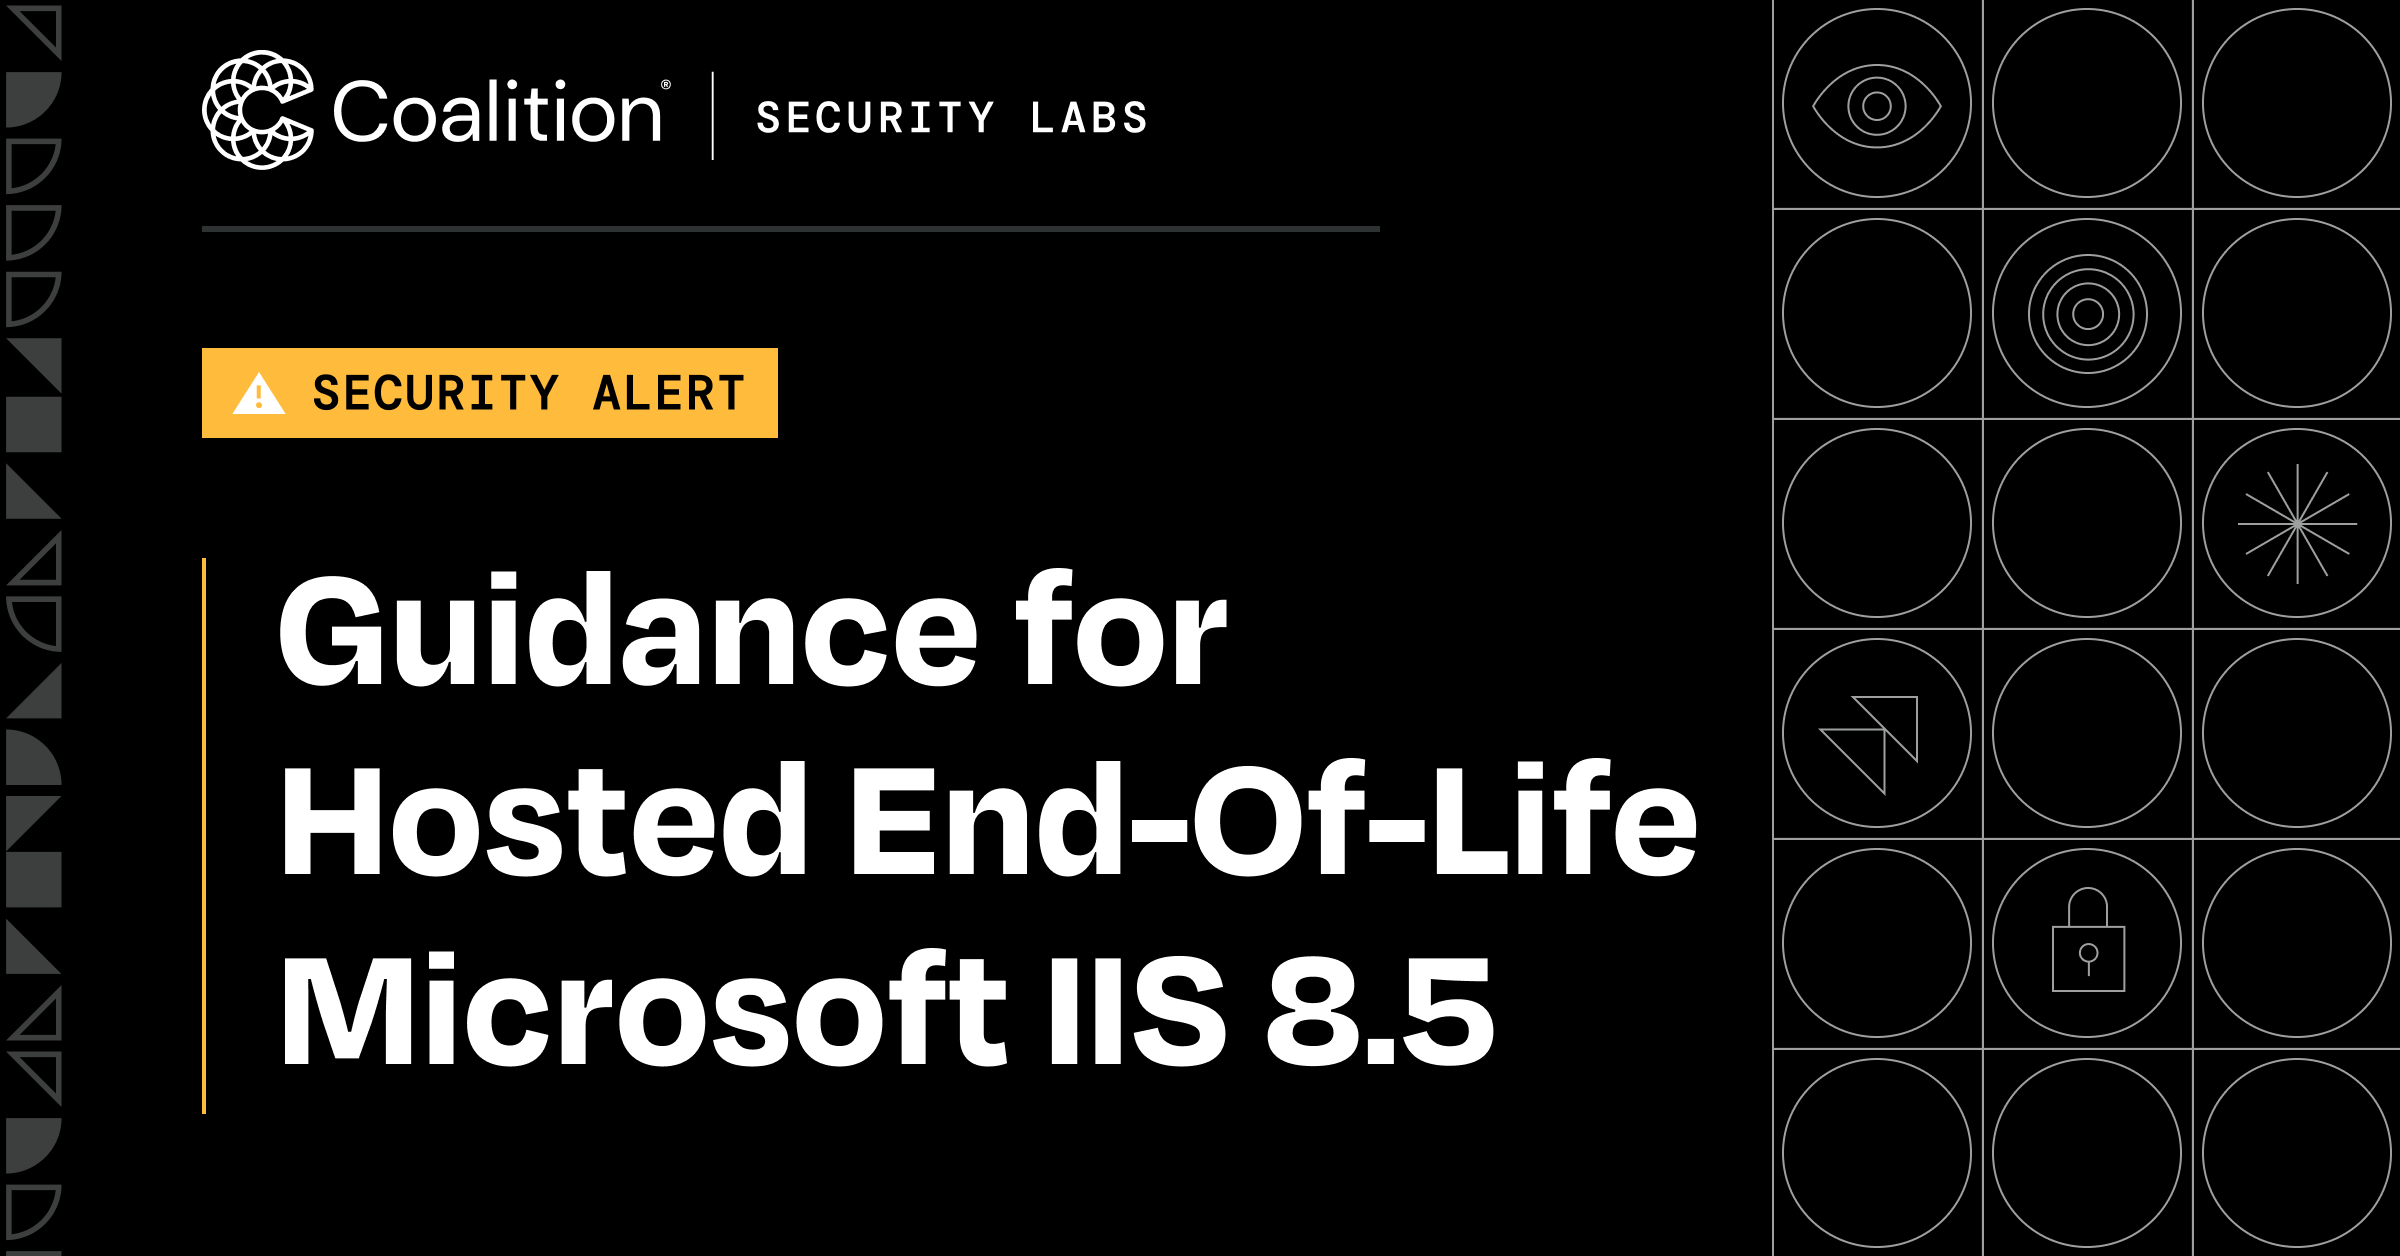 Security Alert: Guidance for Hosted End-Of-Life Microsoft IIS 8.5